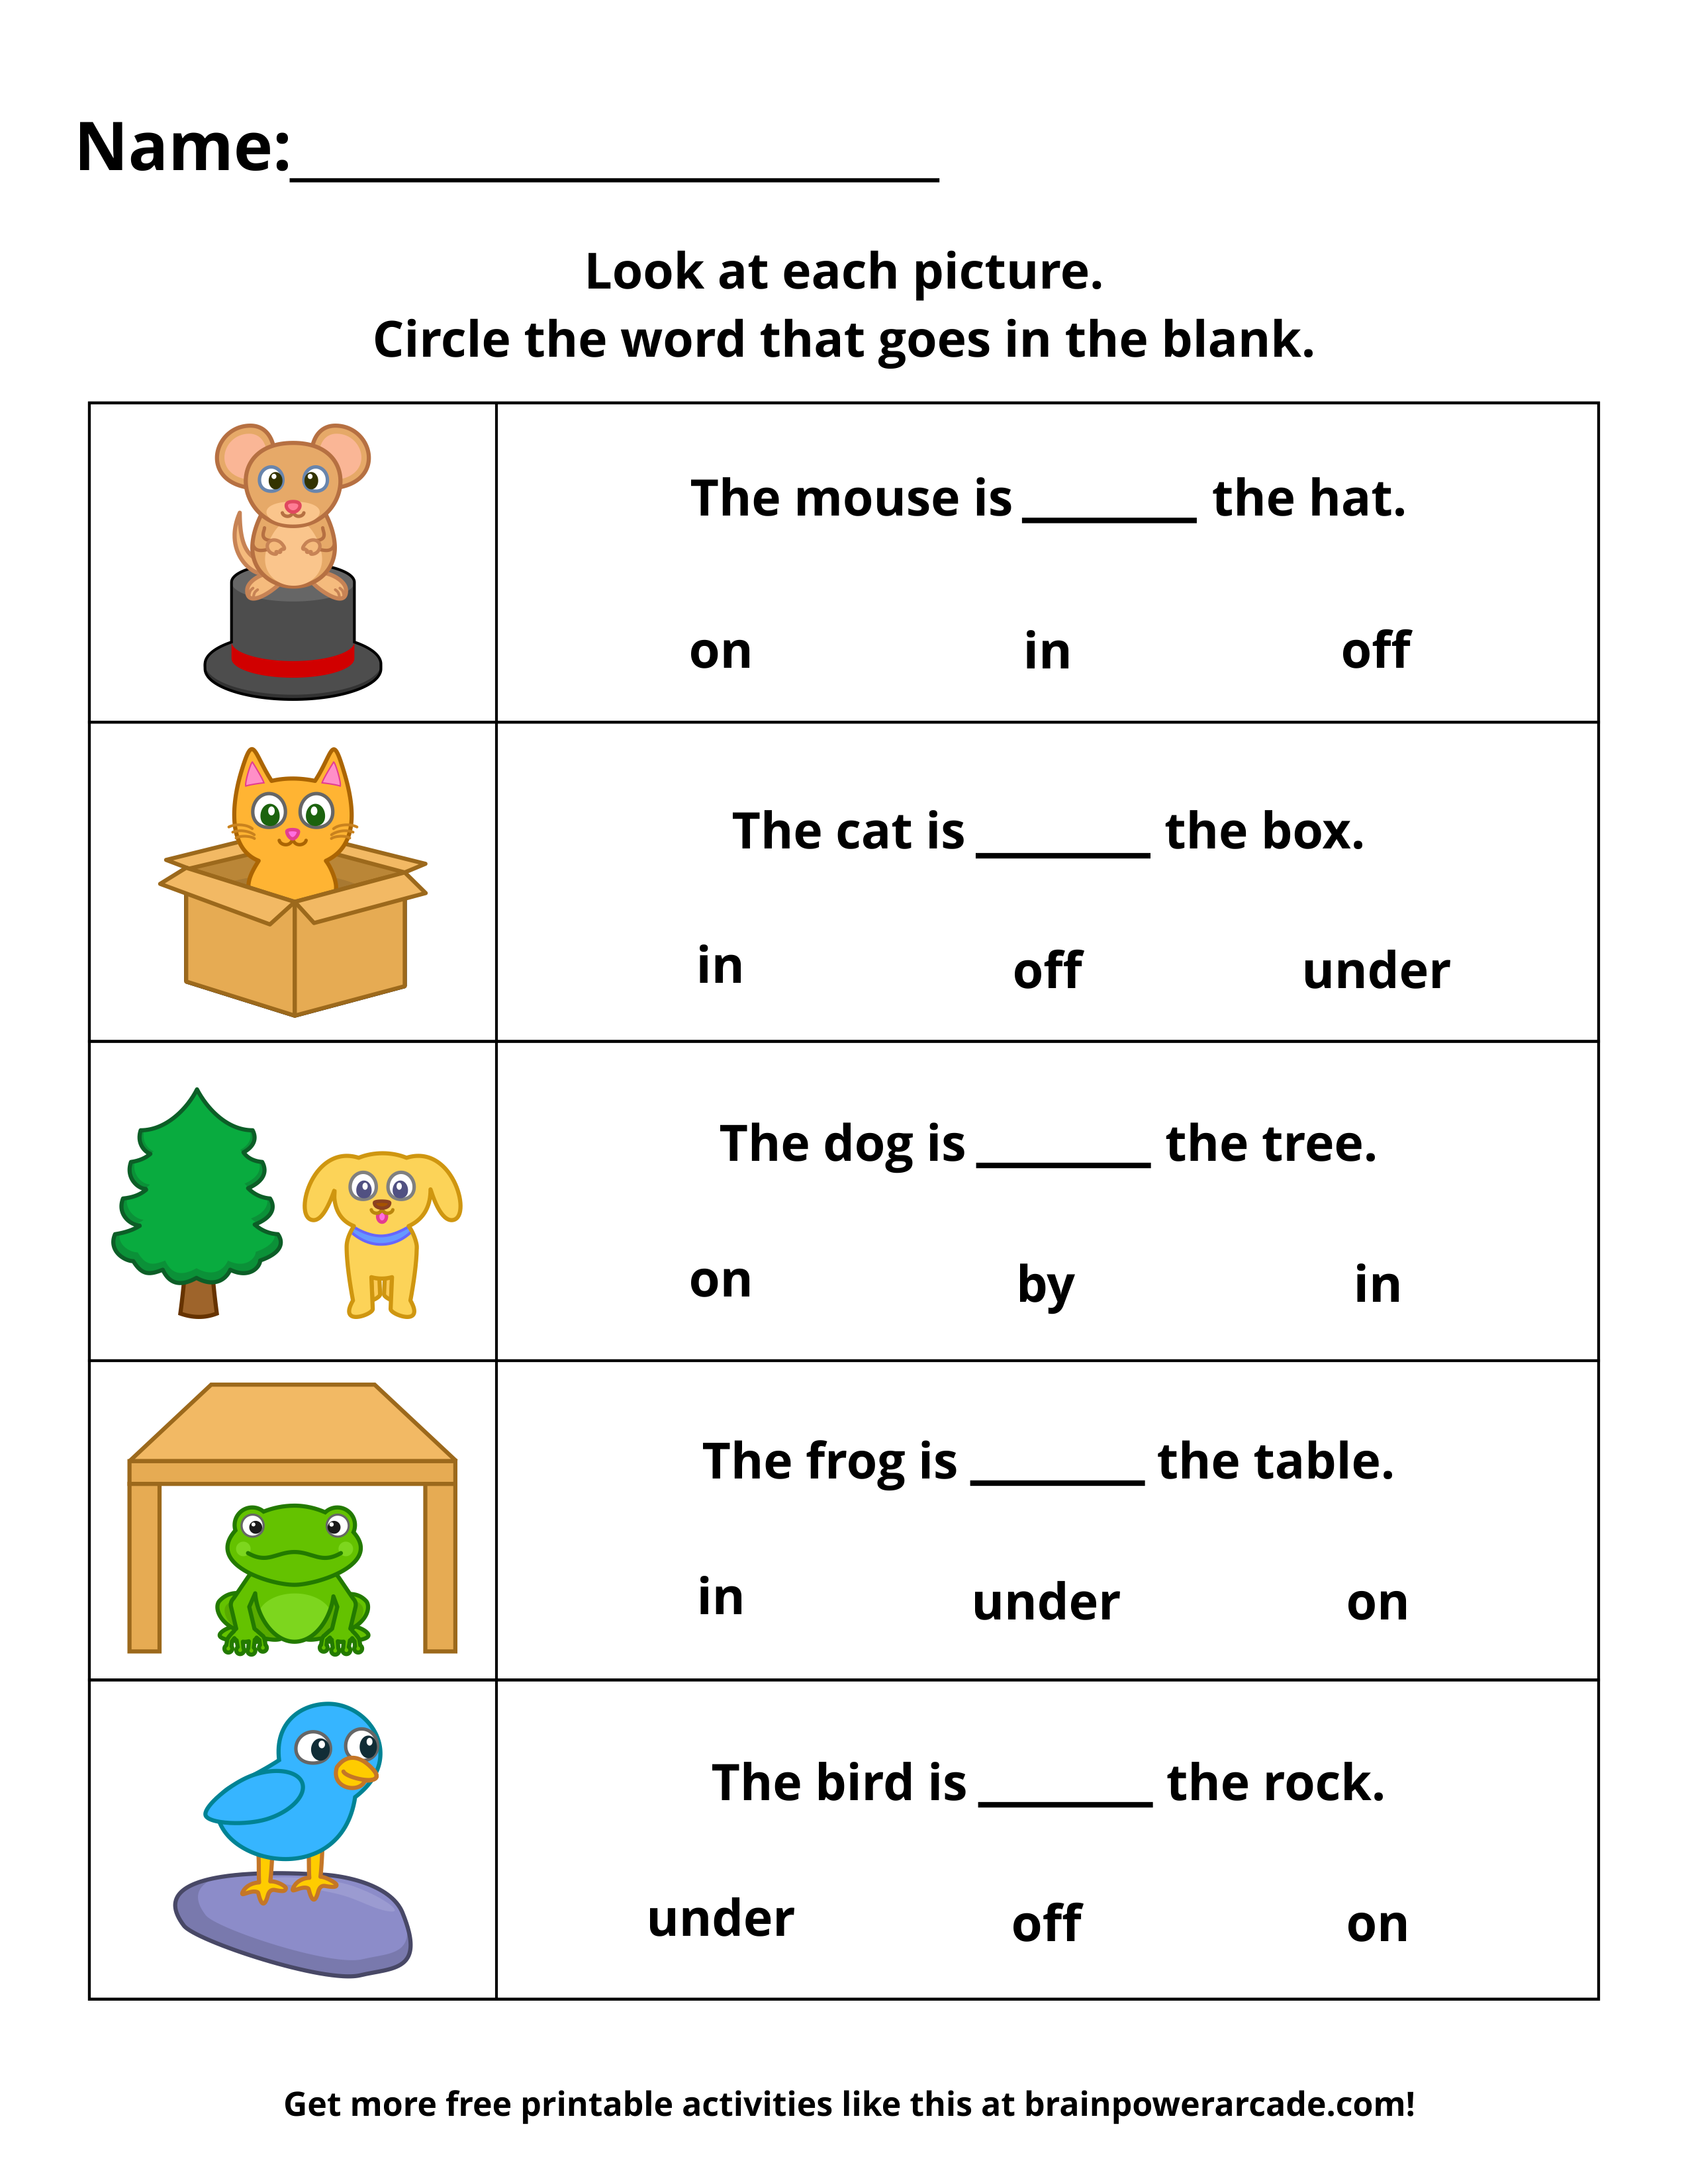 fill-in-the-blanks-to-complete-the-sentence-printable-reading-worksheet